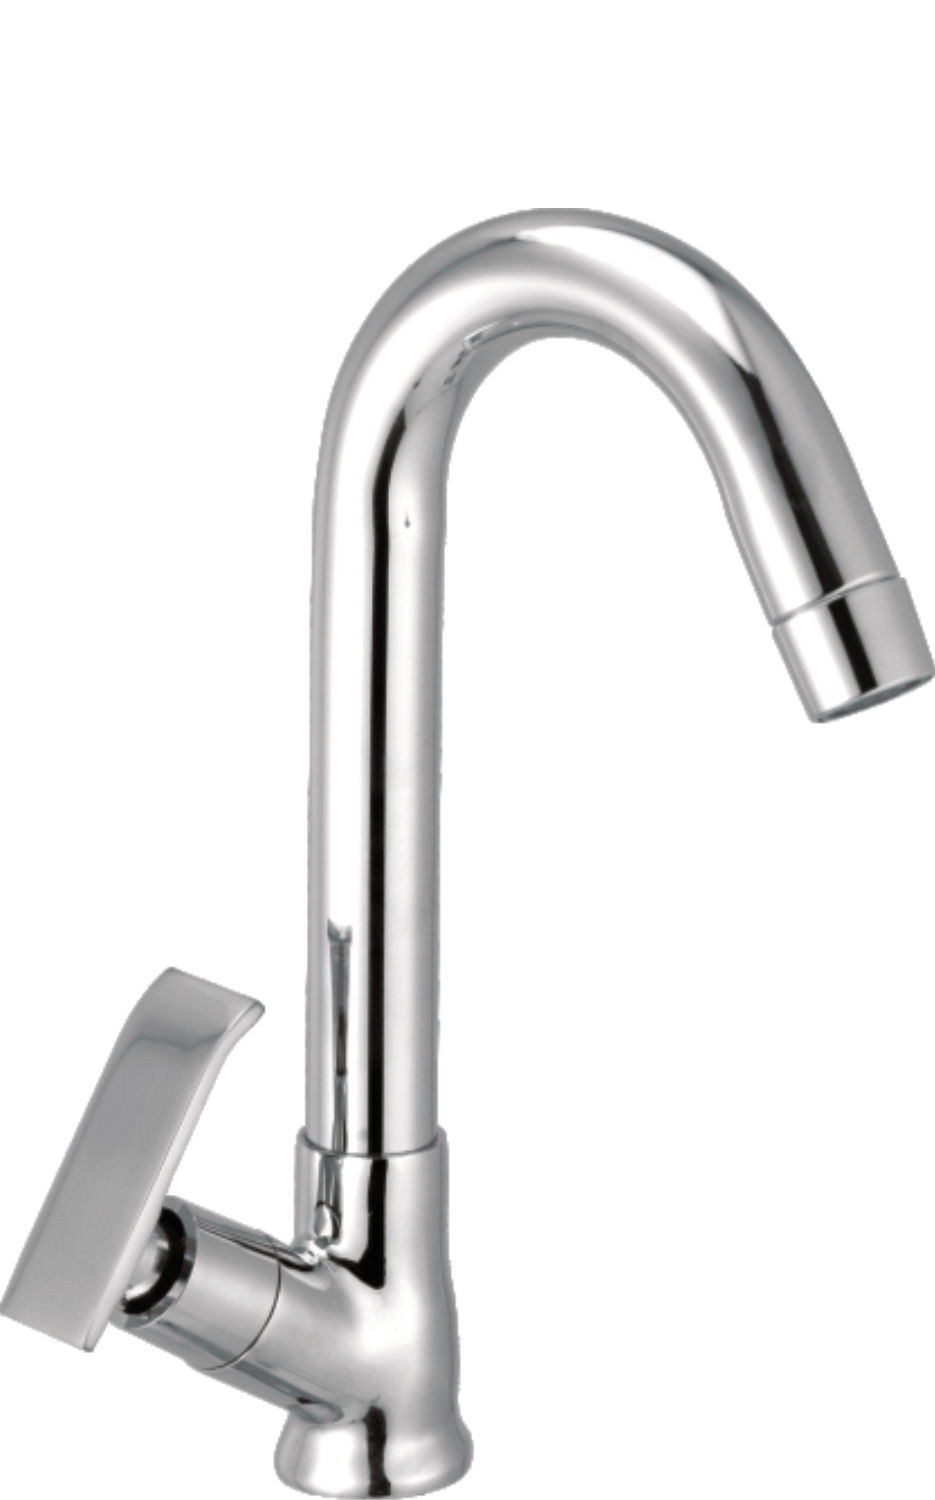 Wall Mixer With Bend